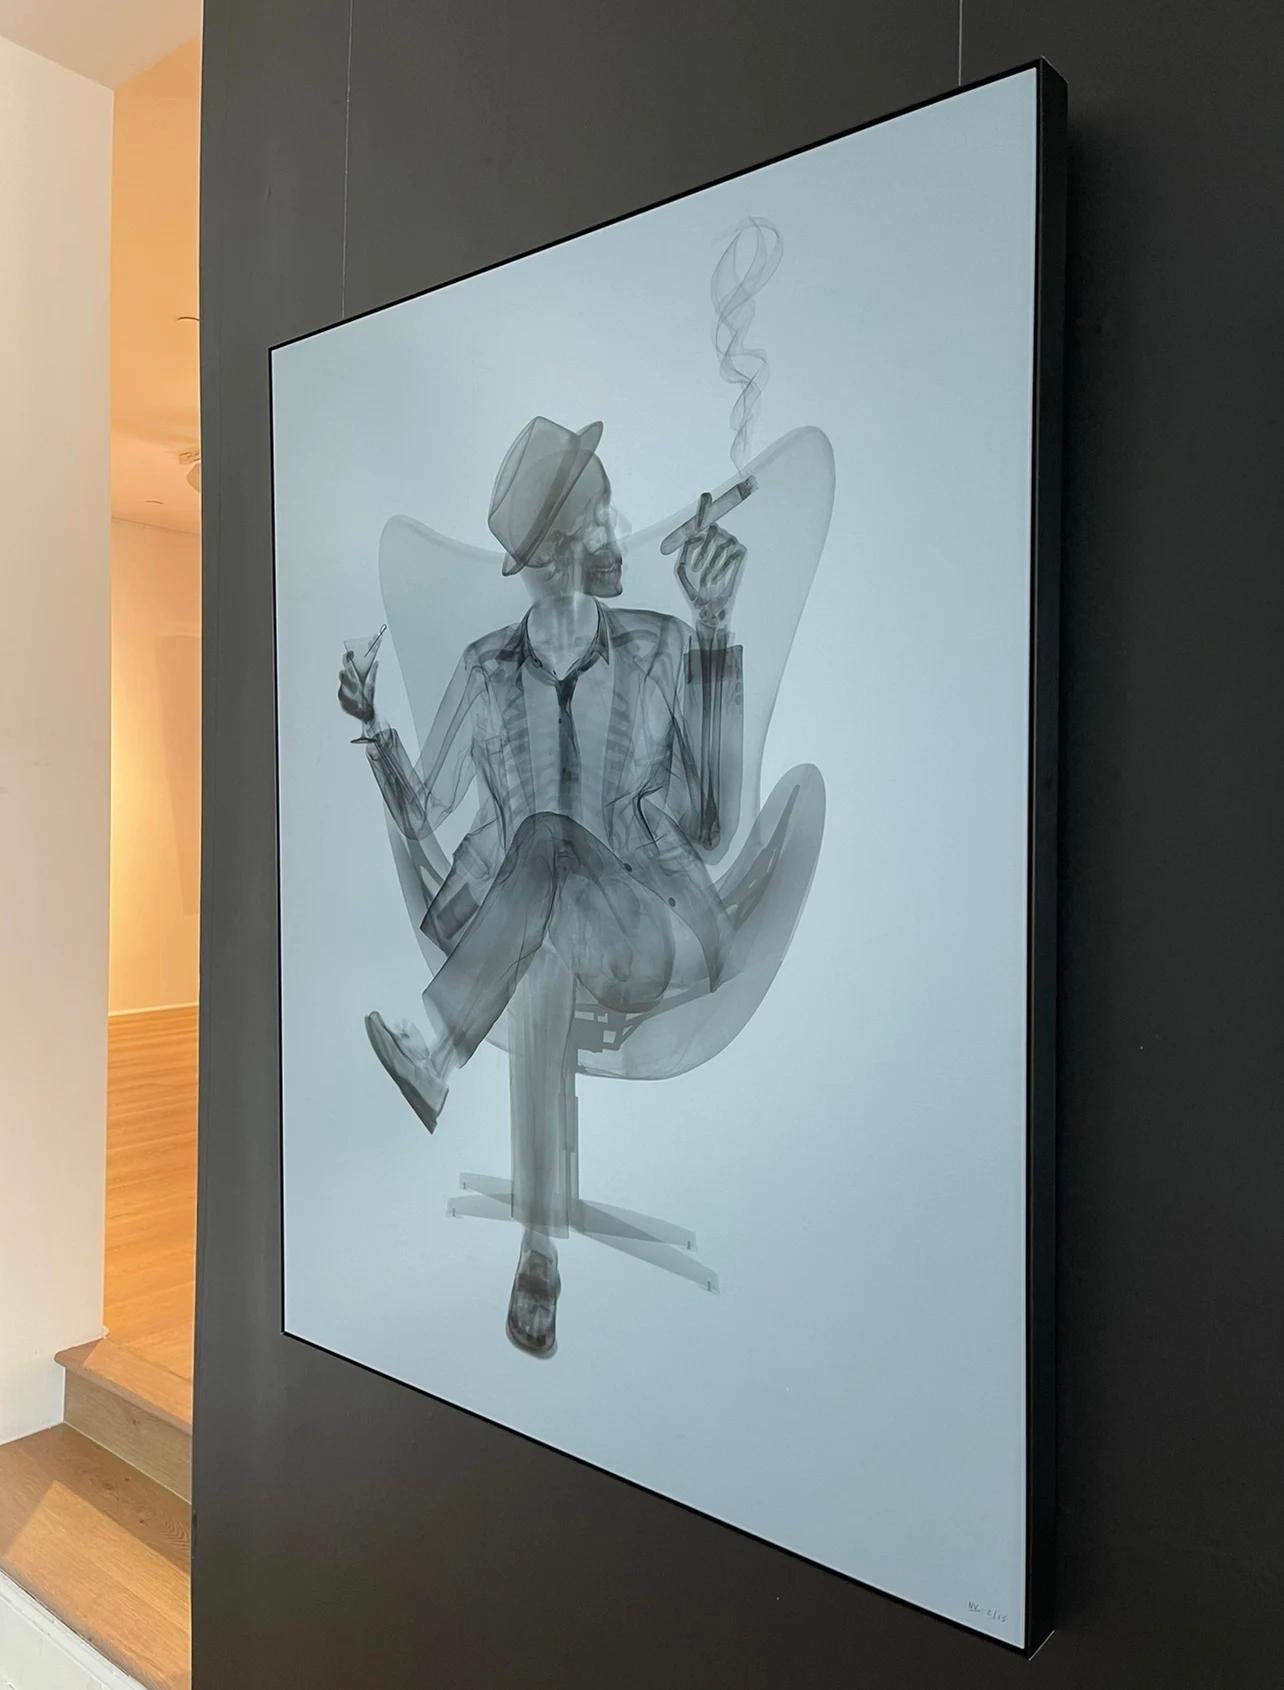 Nick Veasey
Rat Pack II Mid-Grey, 2020
29.5 x 23 inches, Edition of 25
50 x 40 inches, Edition of 15
59 x 47 inches, Edition of 9 
Digital C-type print mounted to dibond with matte plexi face and aluminum art box
Signed and numbered by